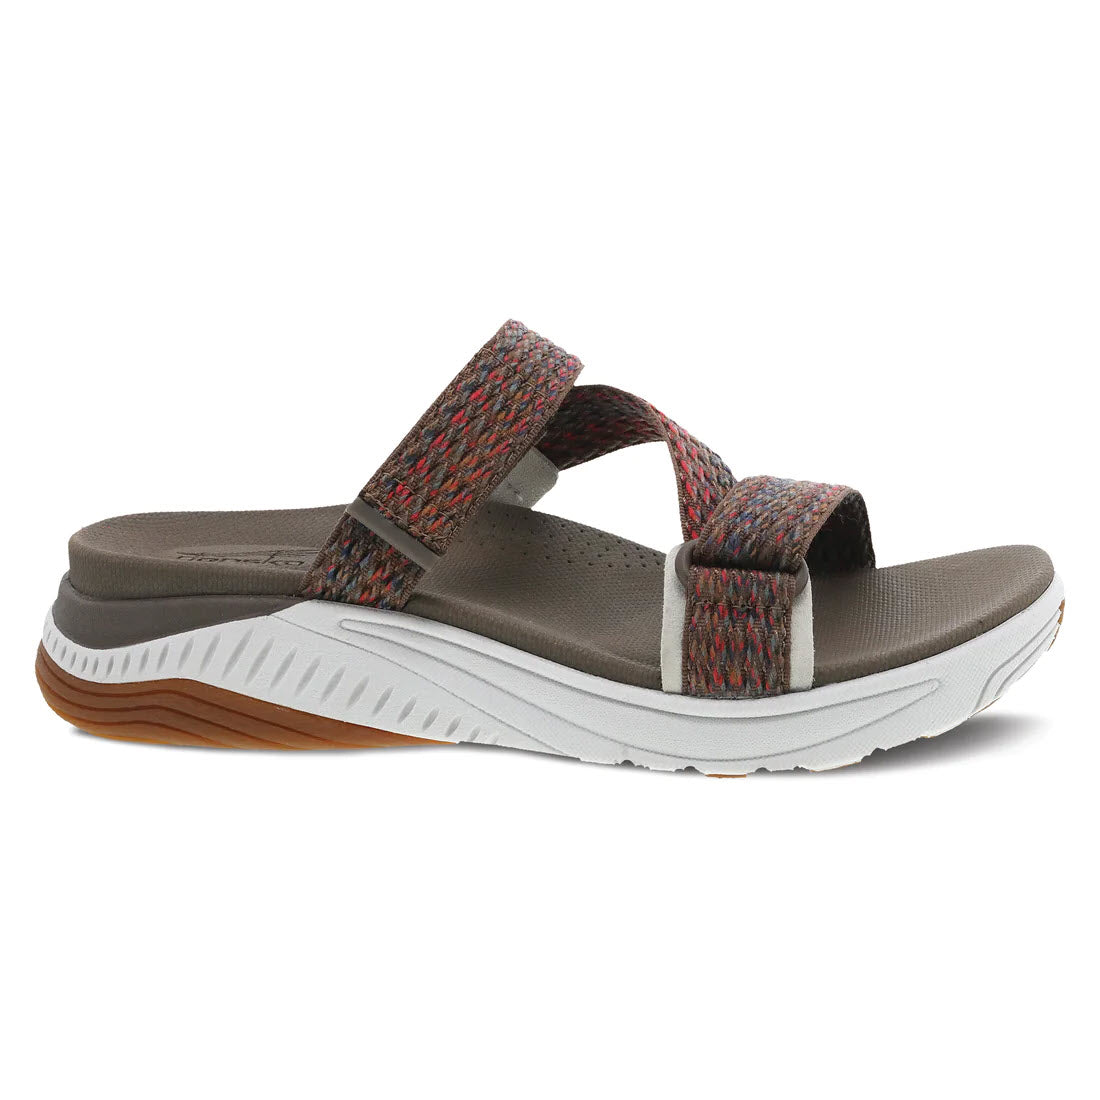 A single Dansko sandal with multicolored straps and a thick, contoured gray sole, isolated on a white background.